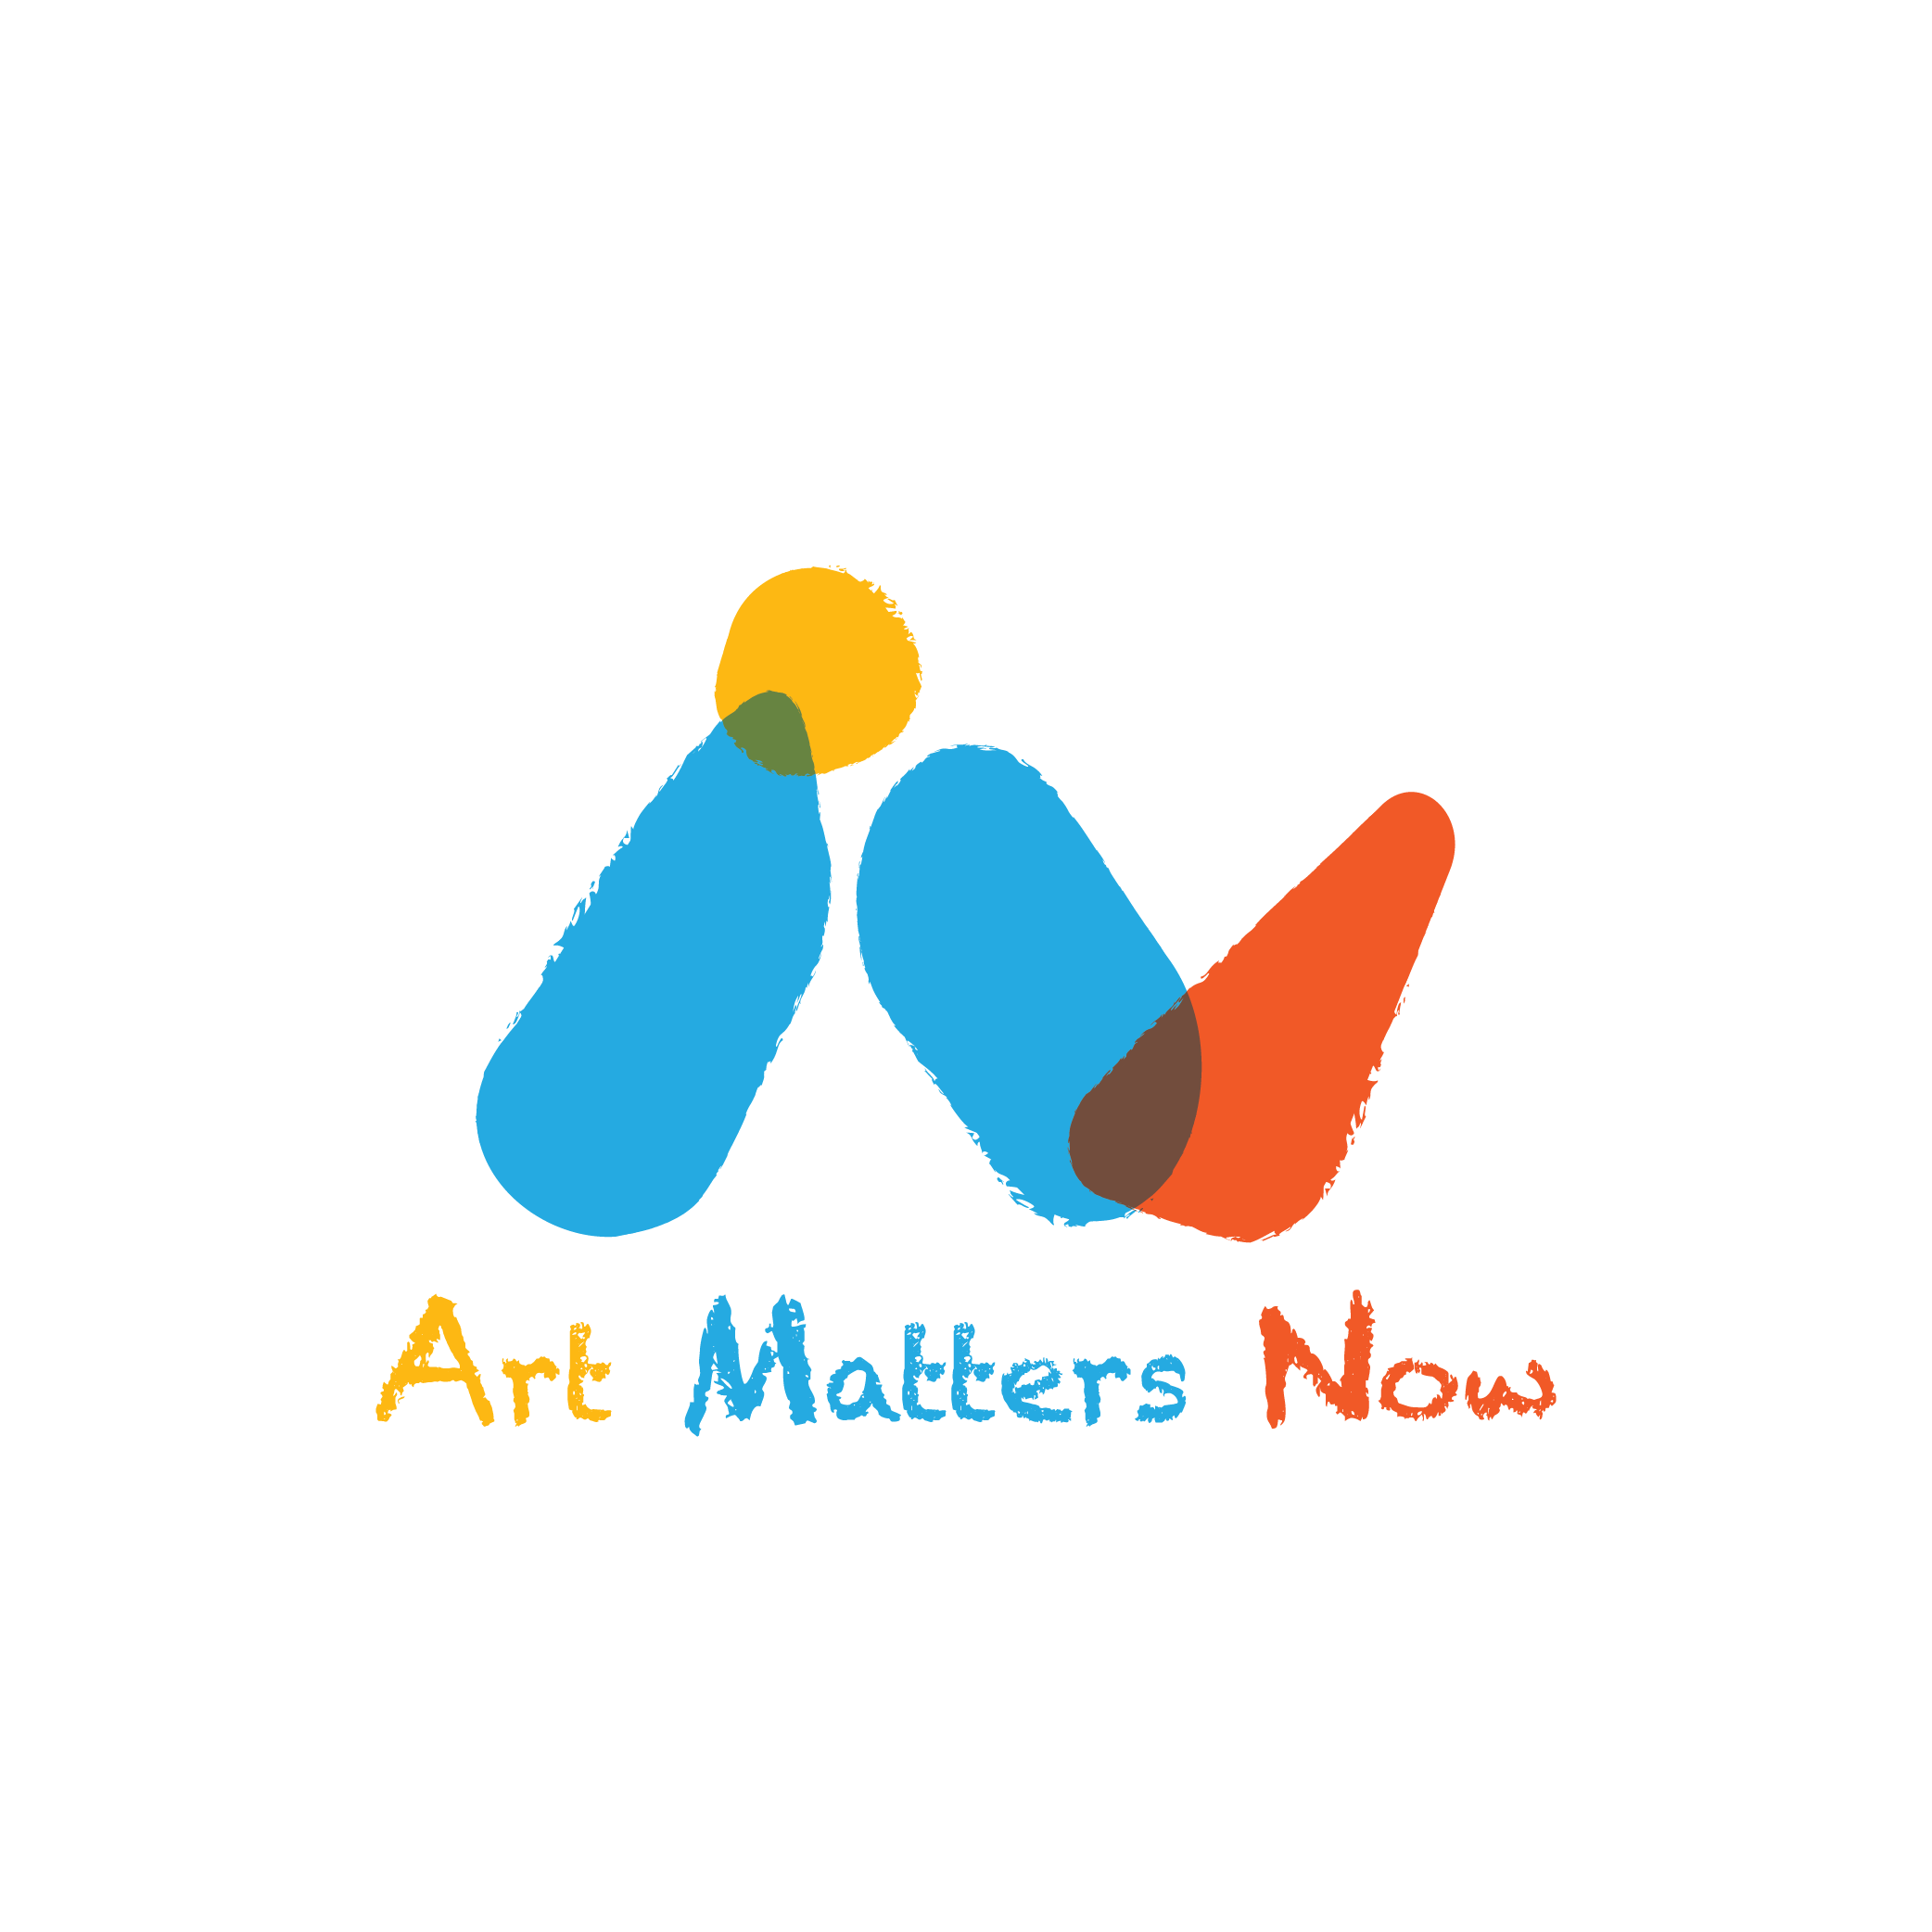 A coloured logo of Art Matters Now